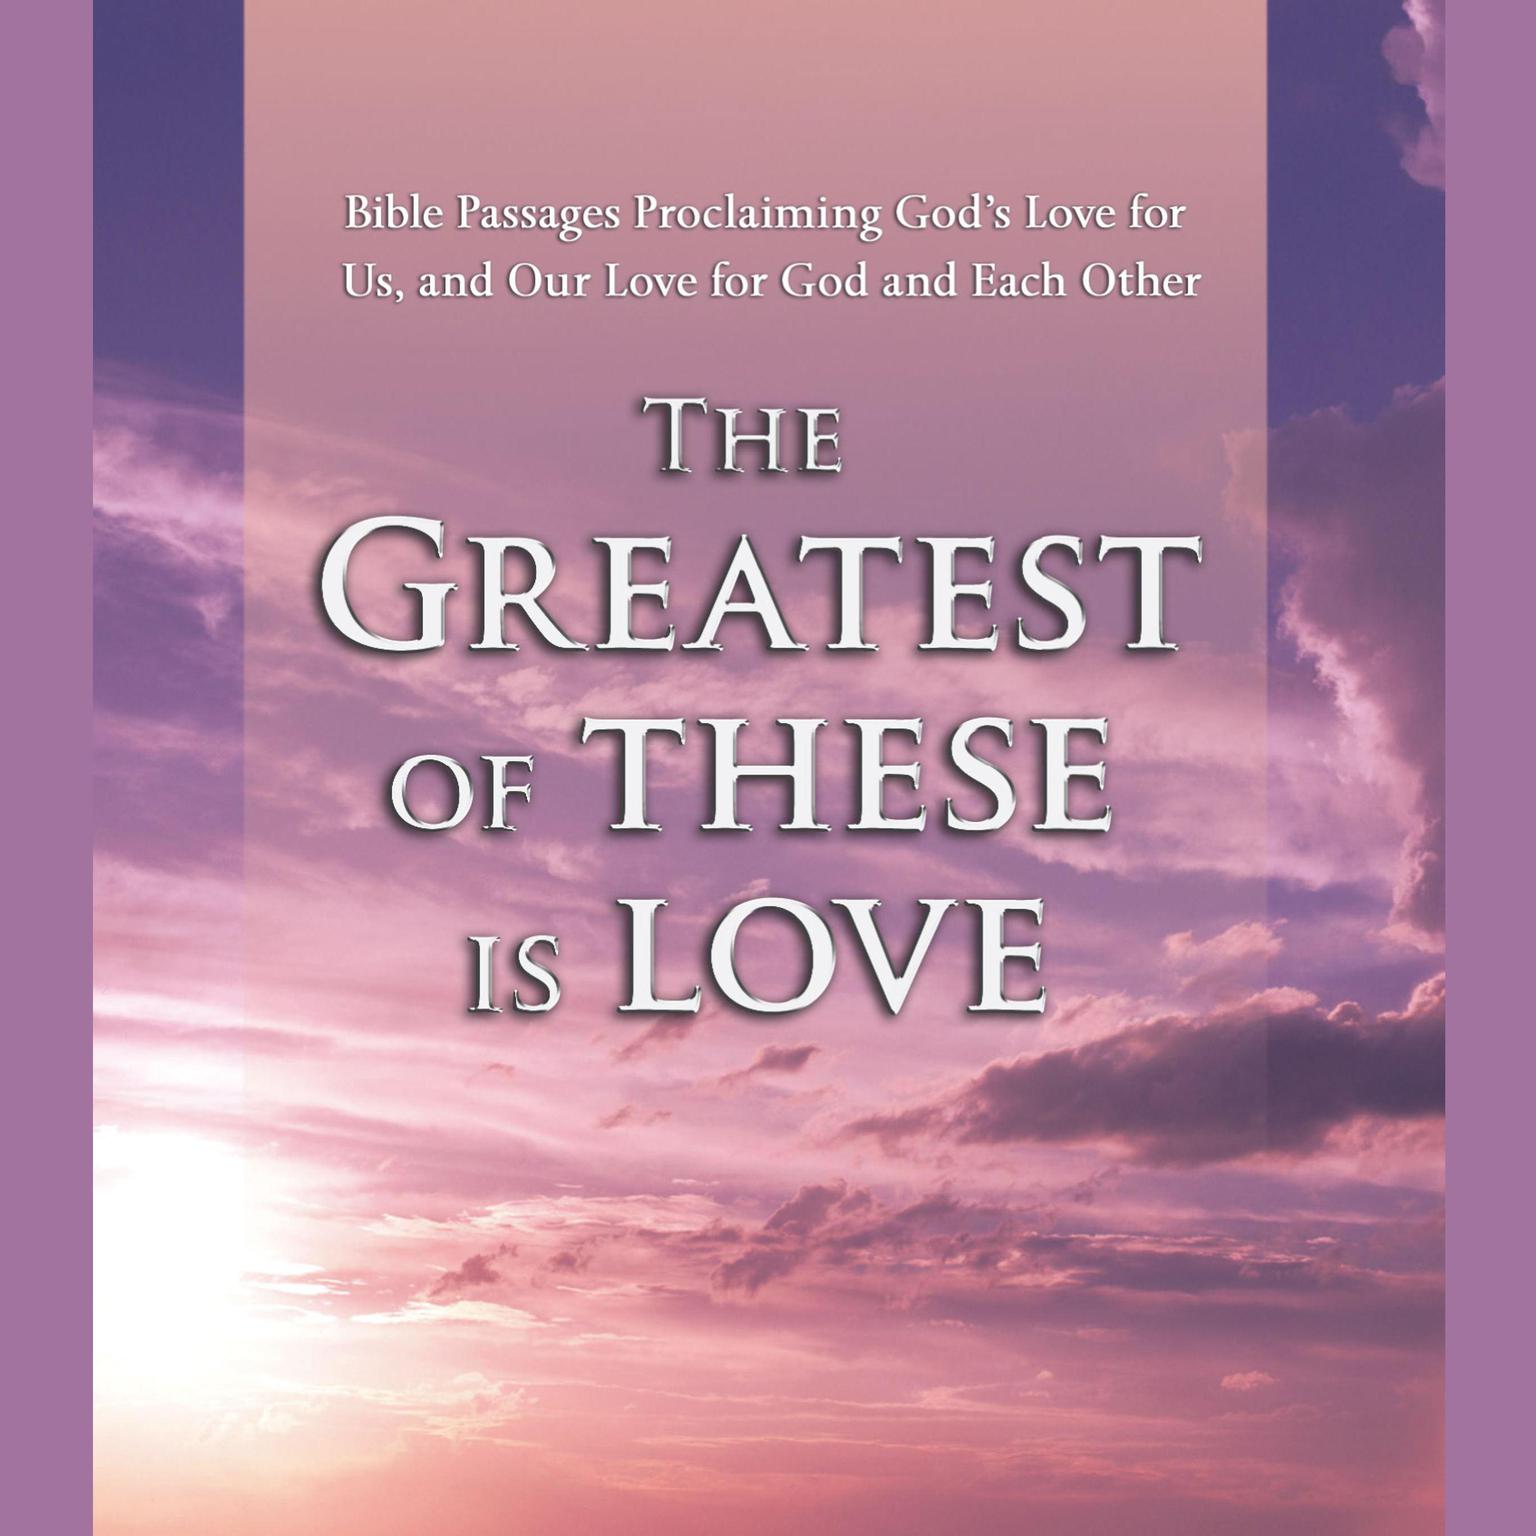 The Greatest of These is Love (Abridged): Bible Passages Proclaiming Gods Love For Us, and Our Love for God and Each Other Audiobook, by Various 